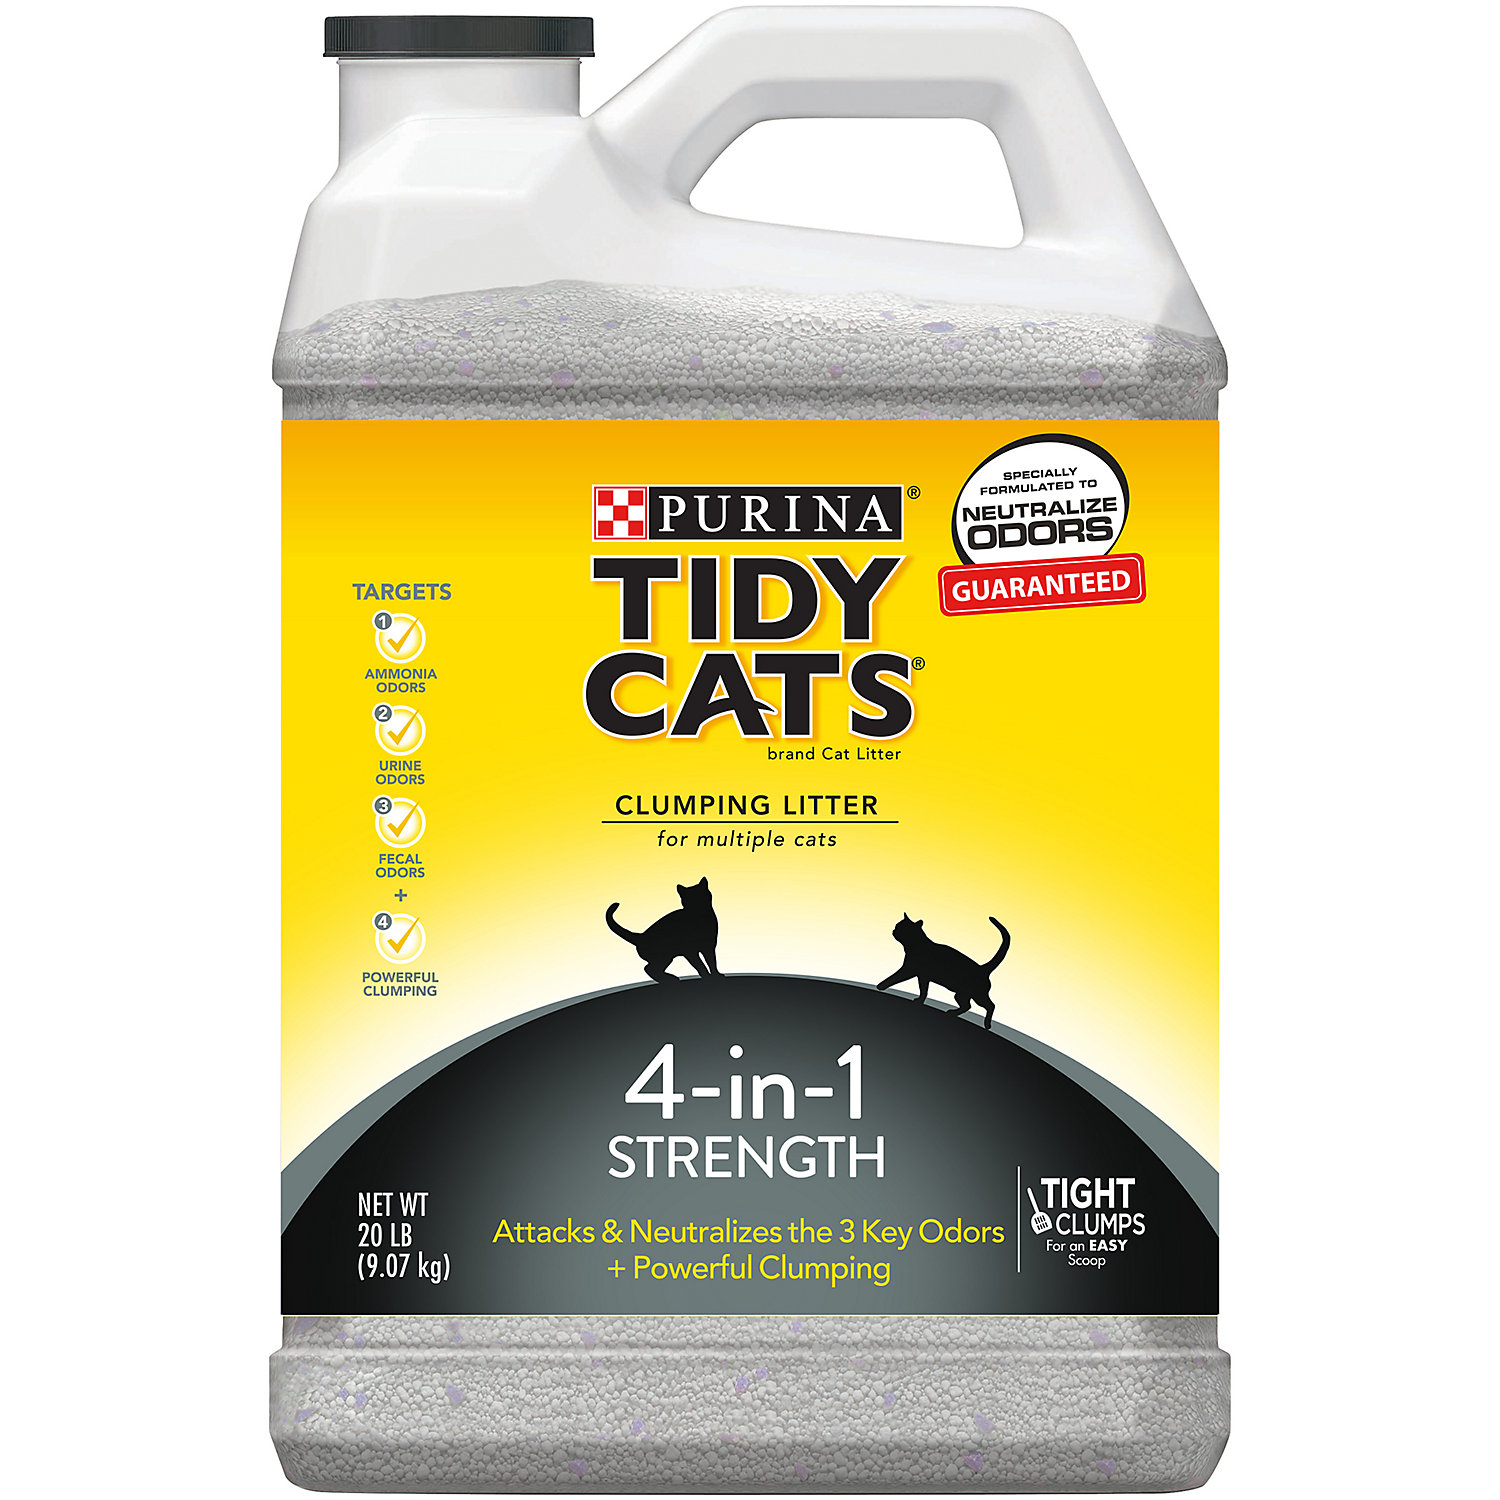 Purina Tidy Cats Clumping Litter 4-in-1 Strength for 